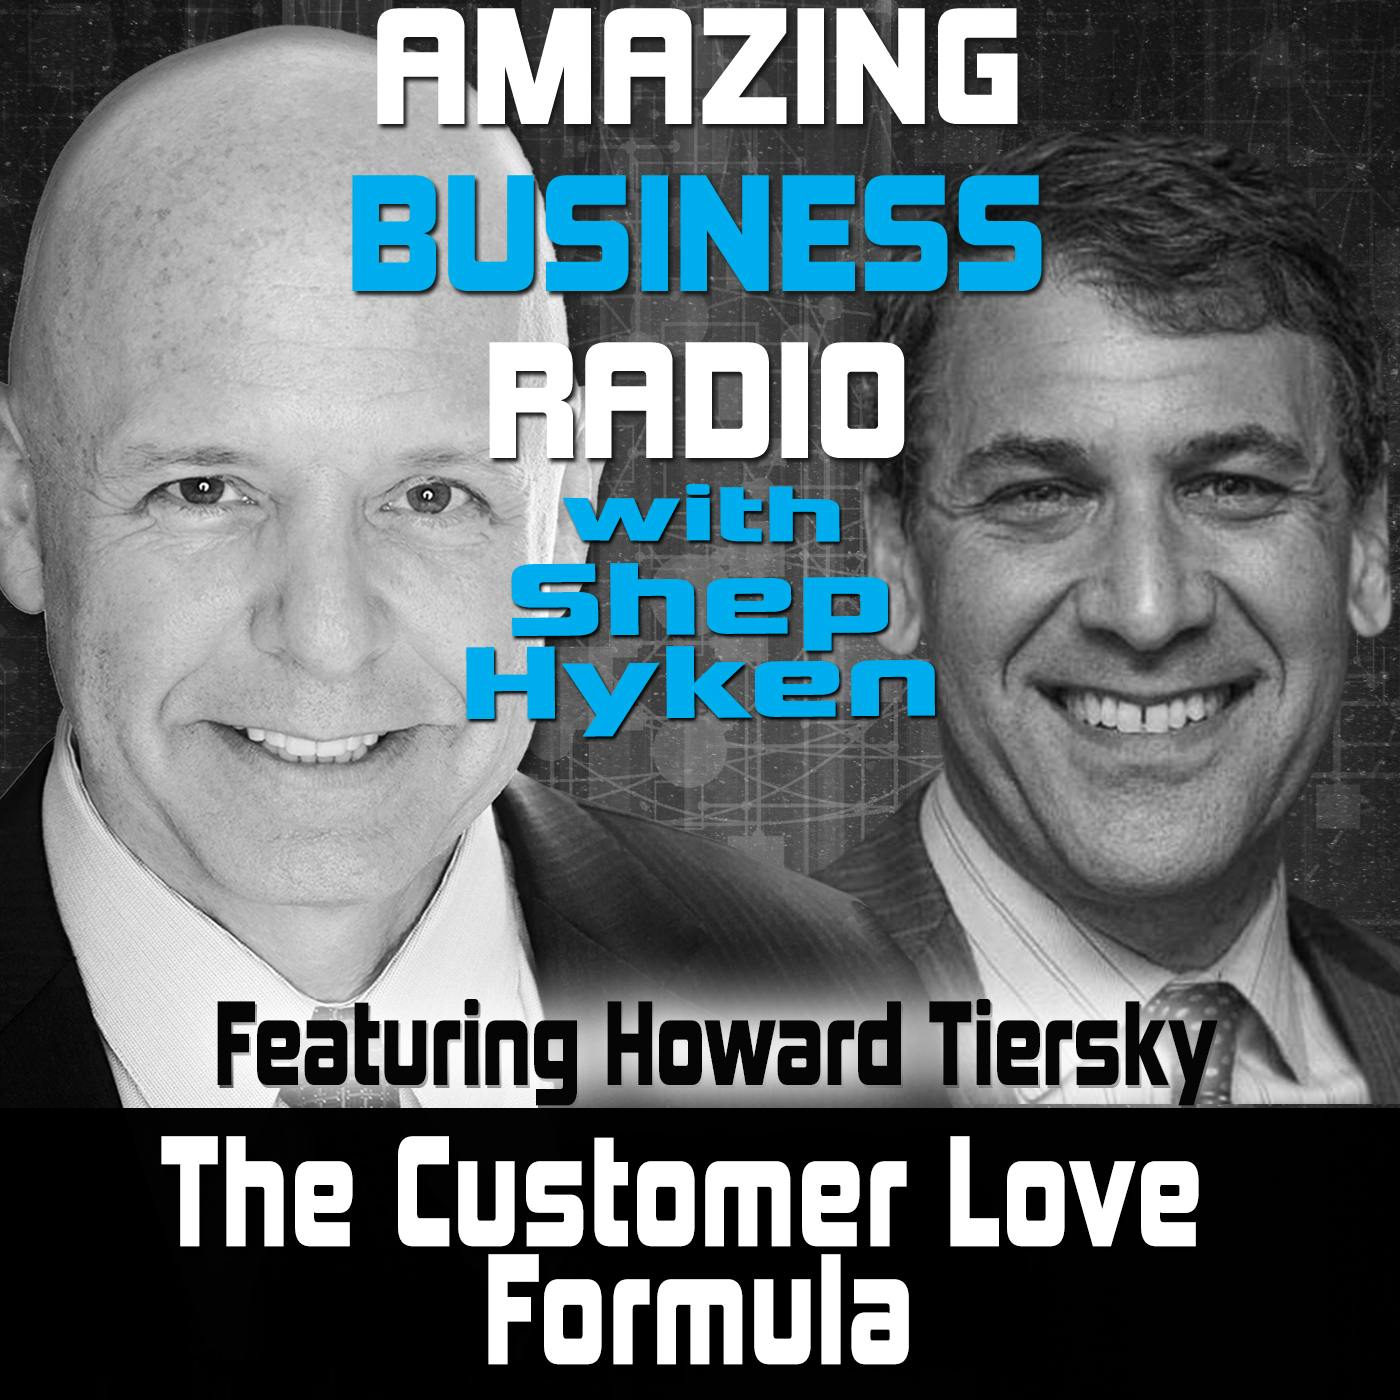 The Customer Love Formula Featuring Howard Tiersky